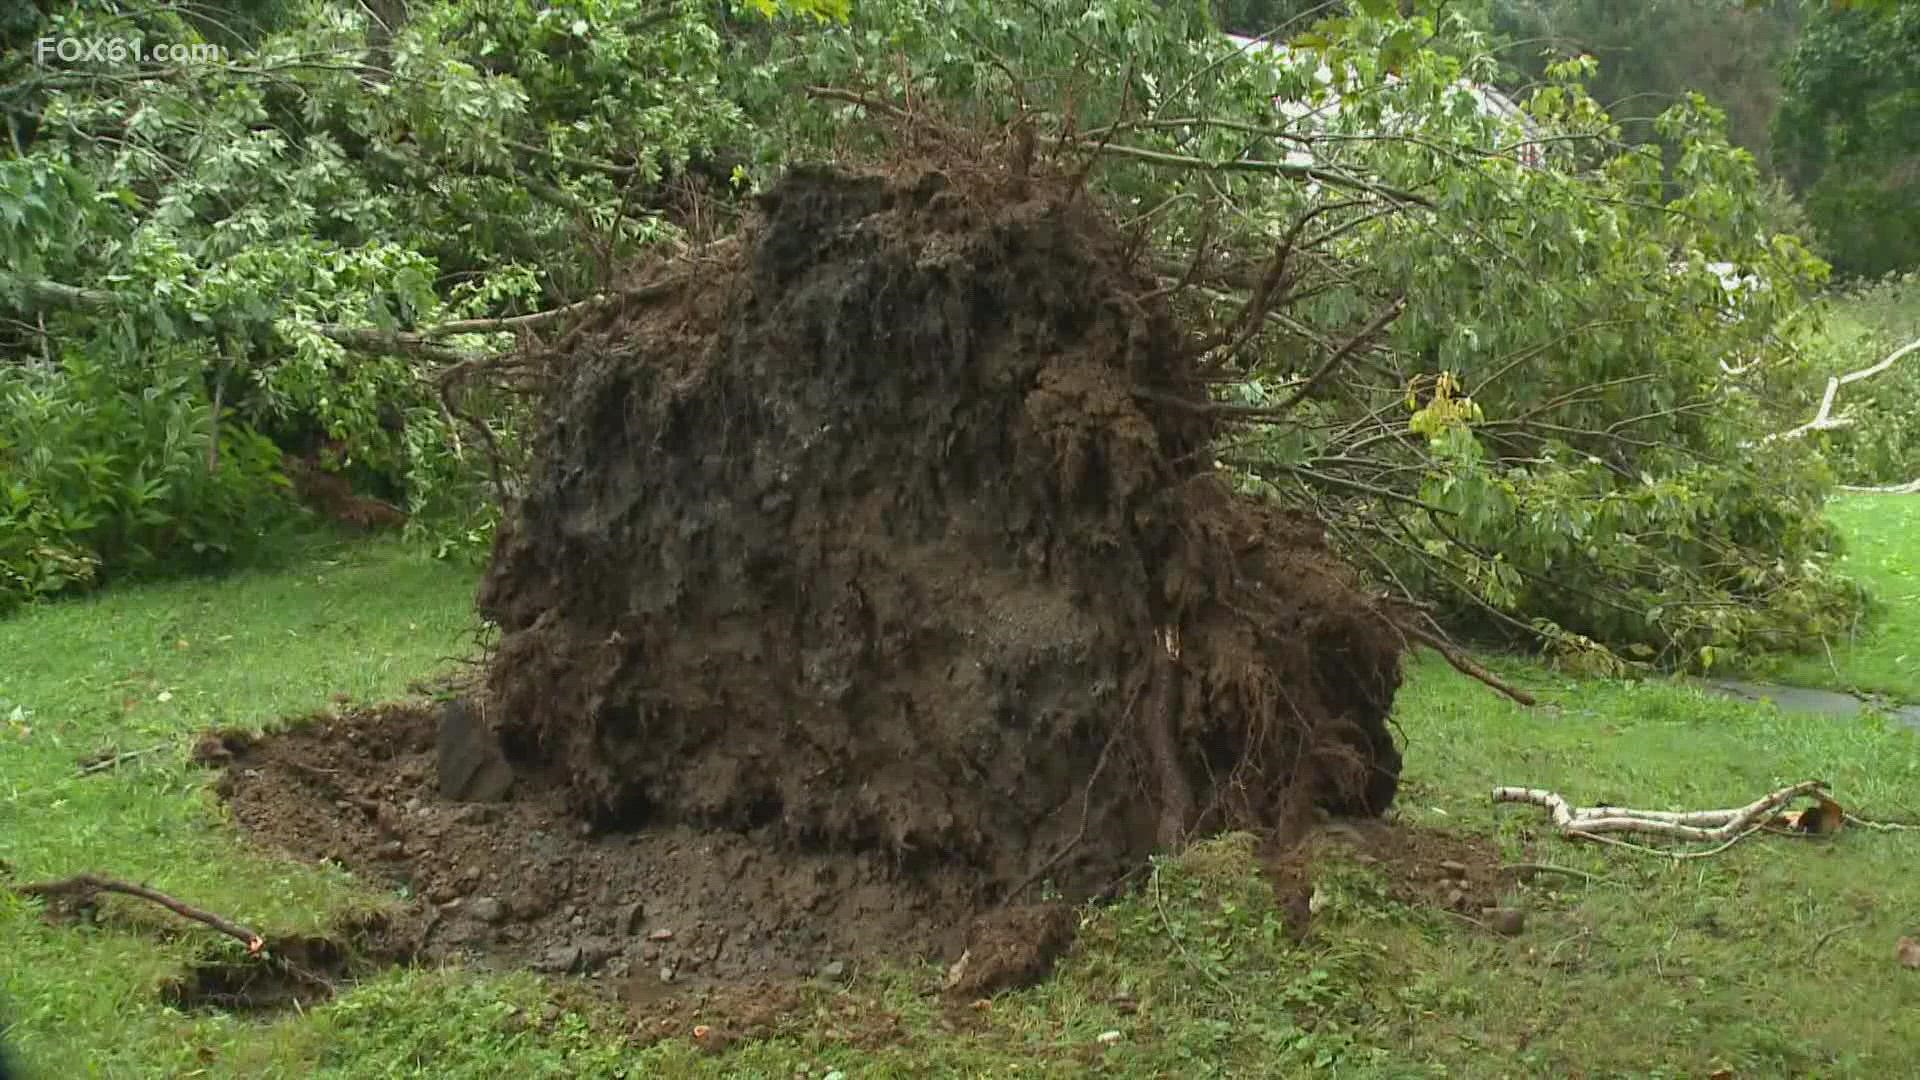 The National Weather Service confirmed an EF0 tornado touched down in Coventry early Thursday morning.